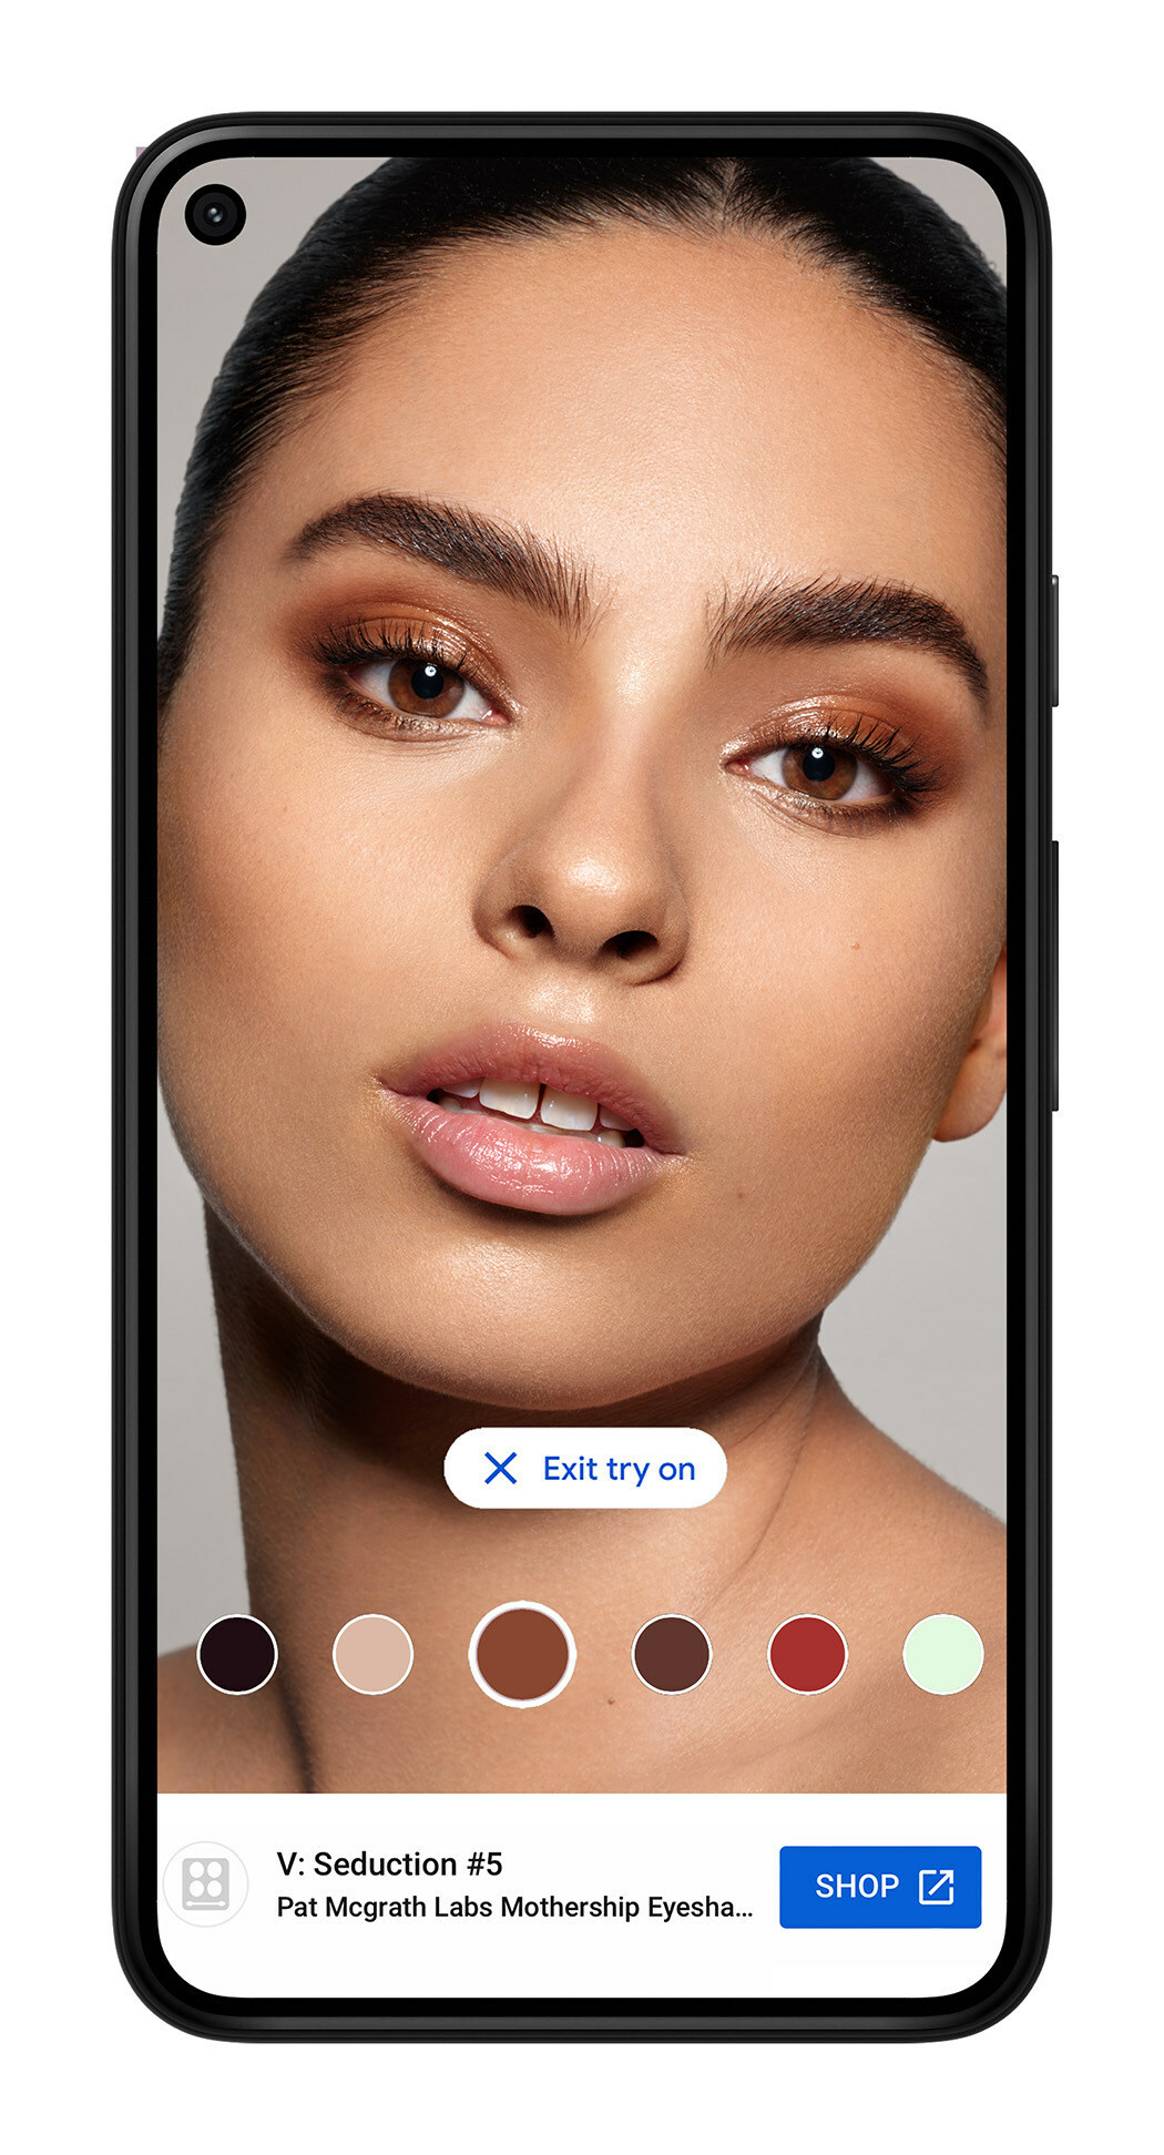 Google's AR virtual try-on tool for Pat McGrath Labs